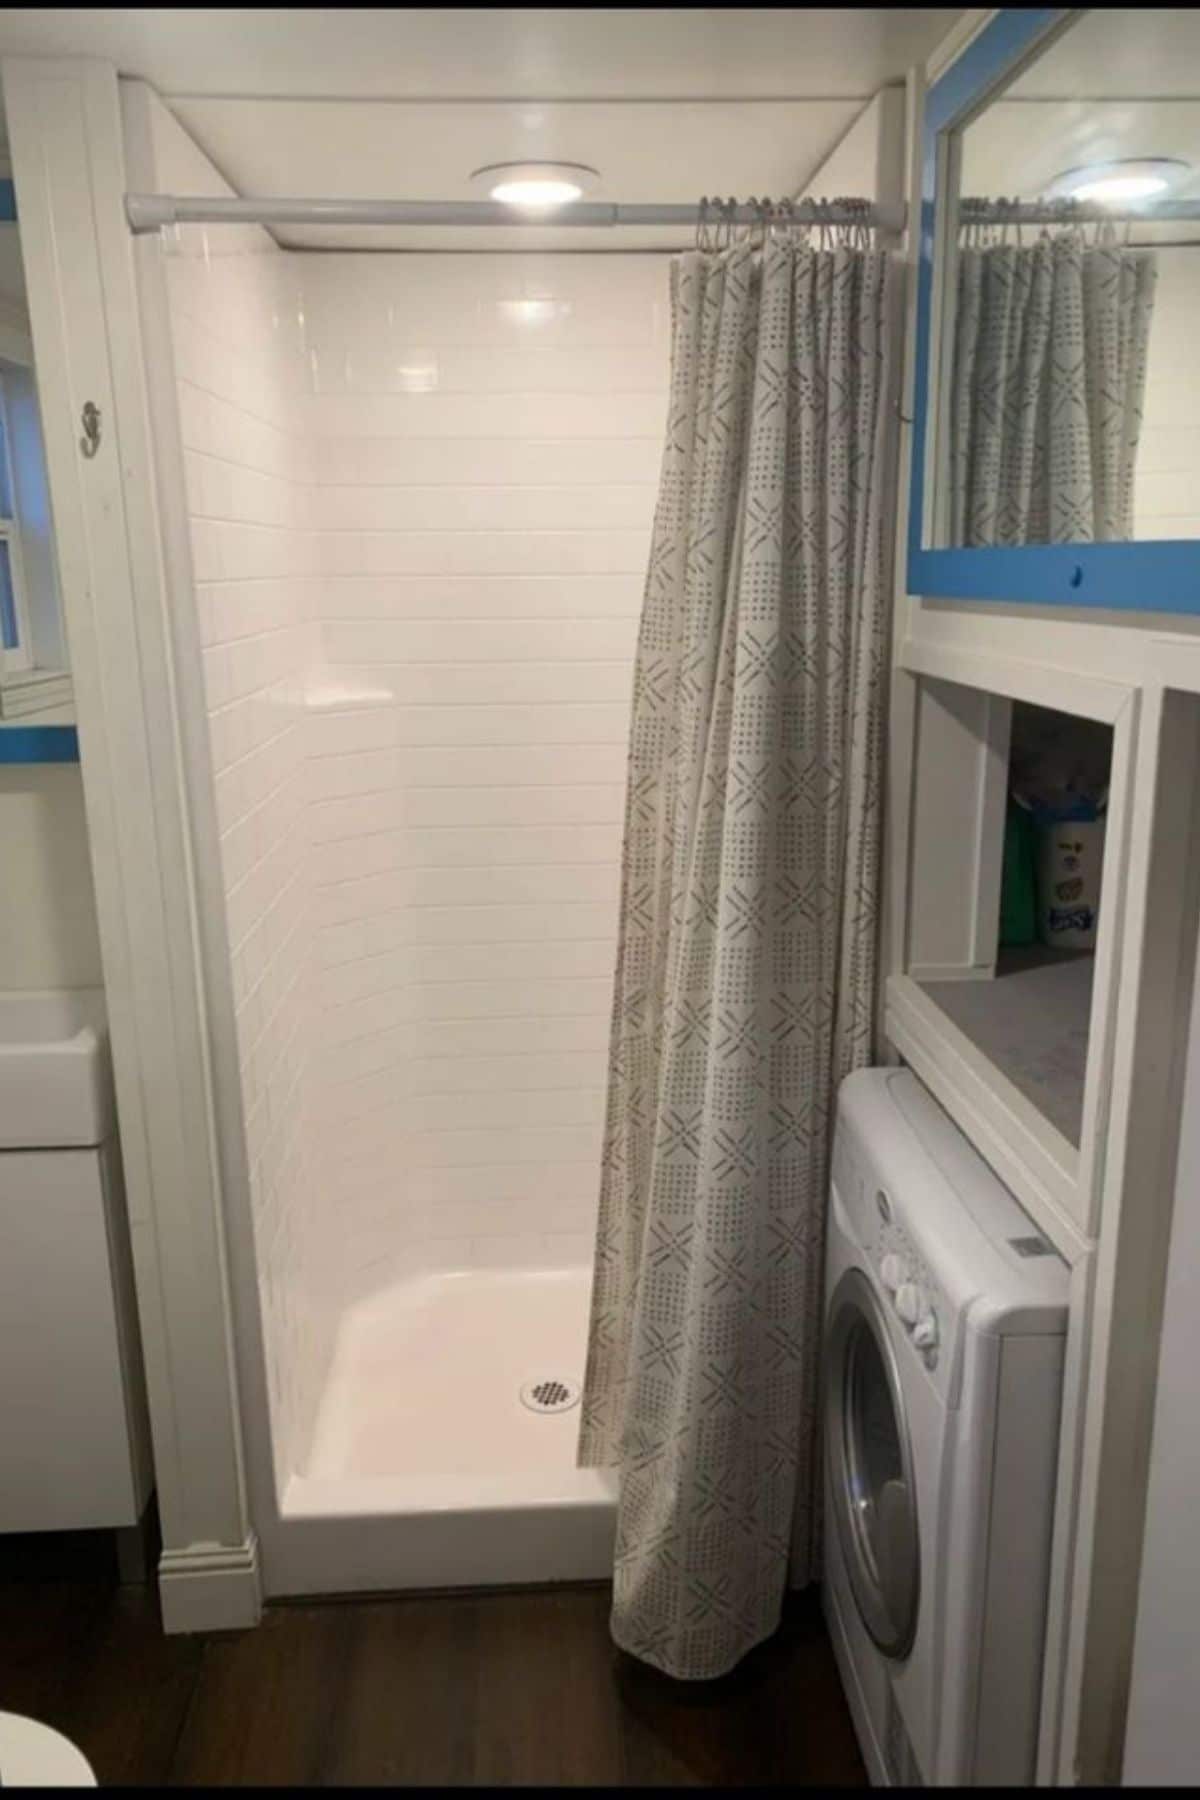 white shower stall with gray curtain at back of bathroom wall